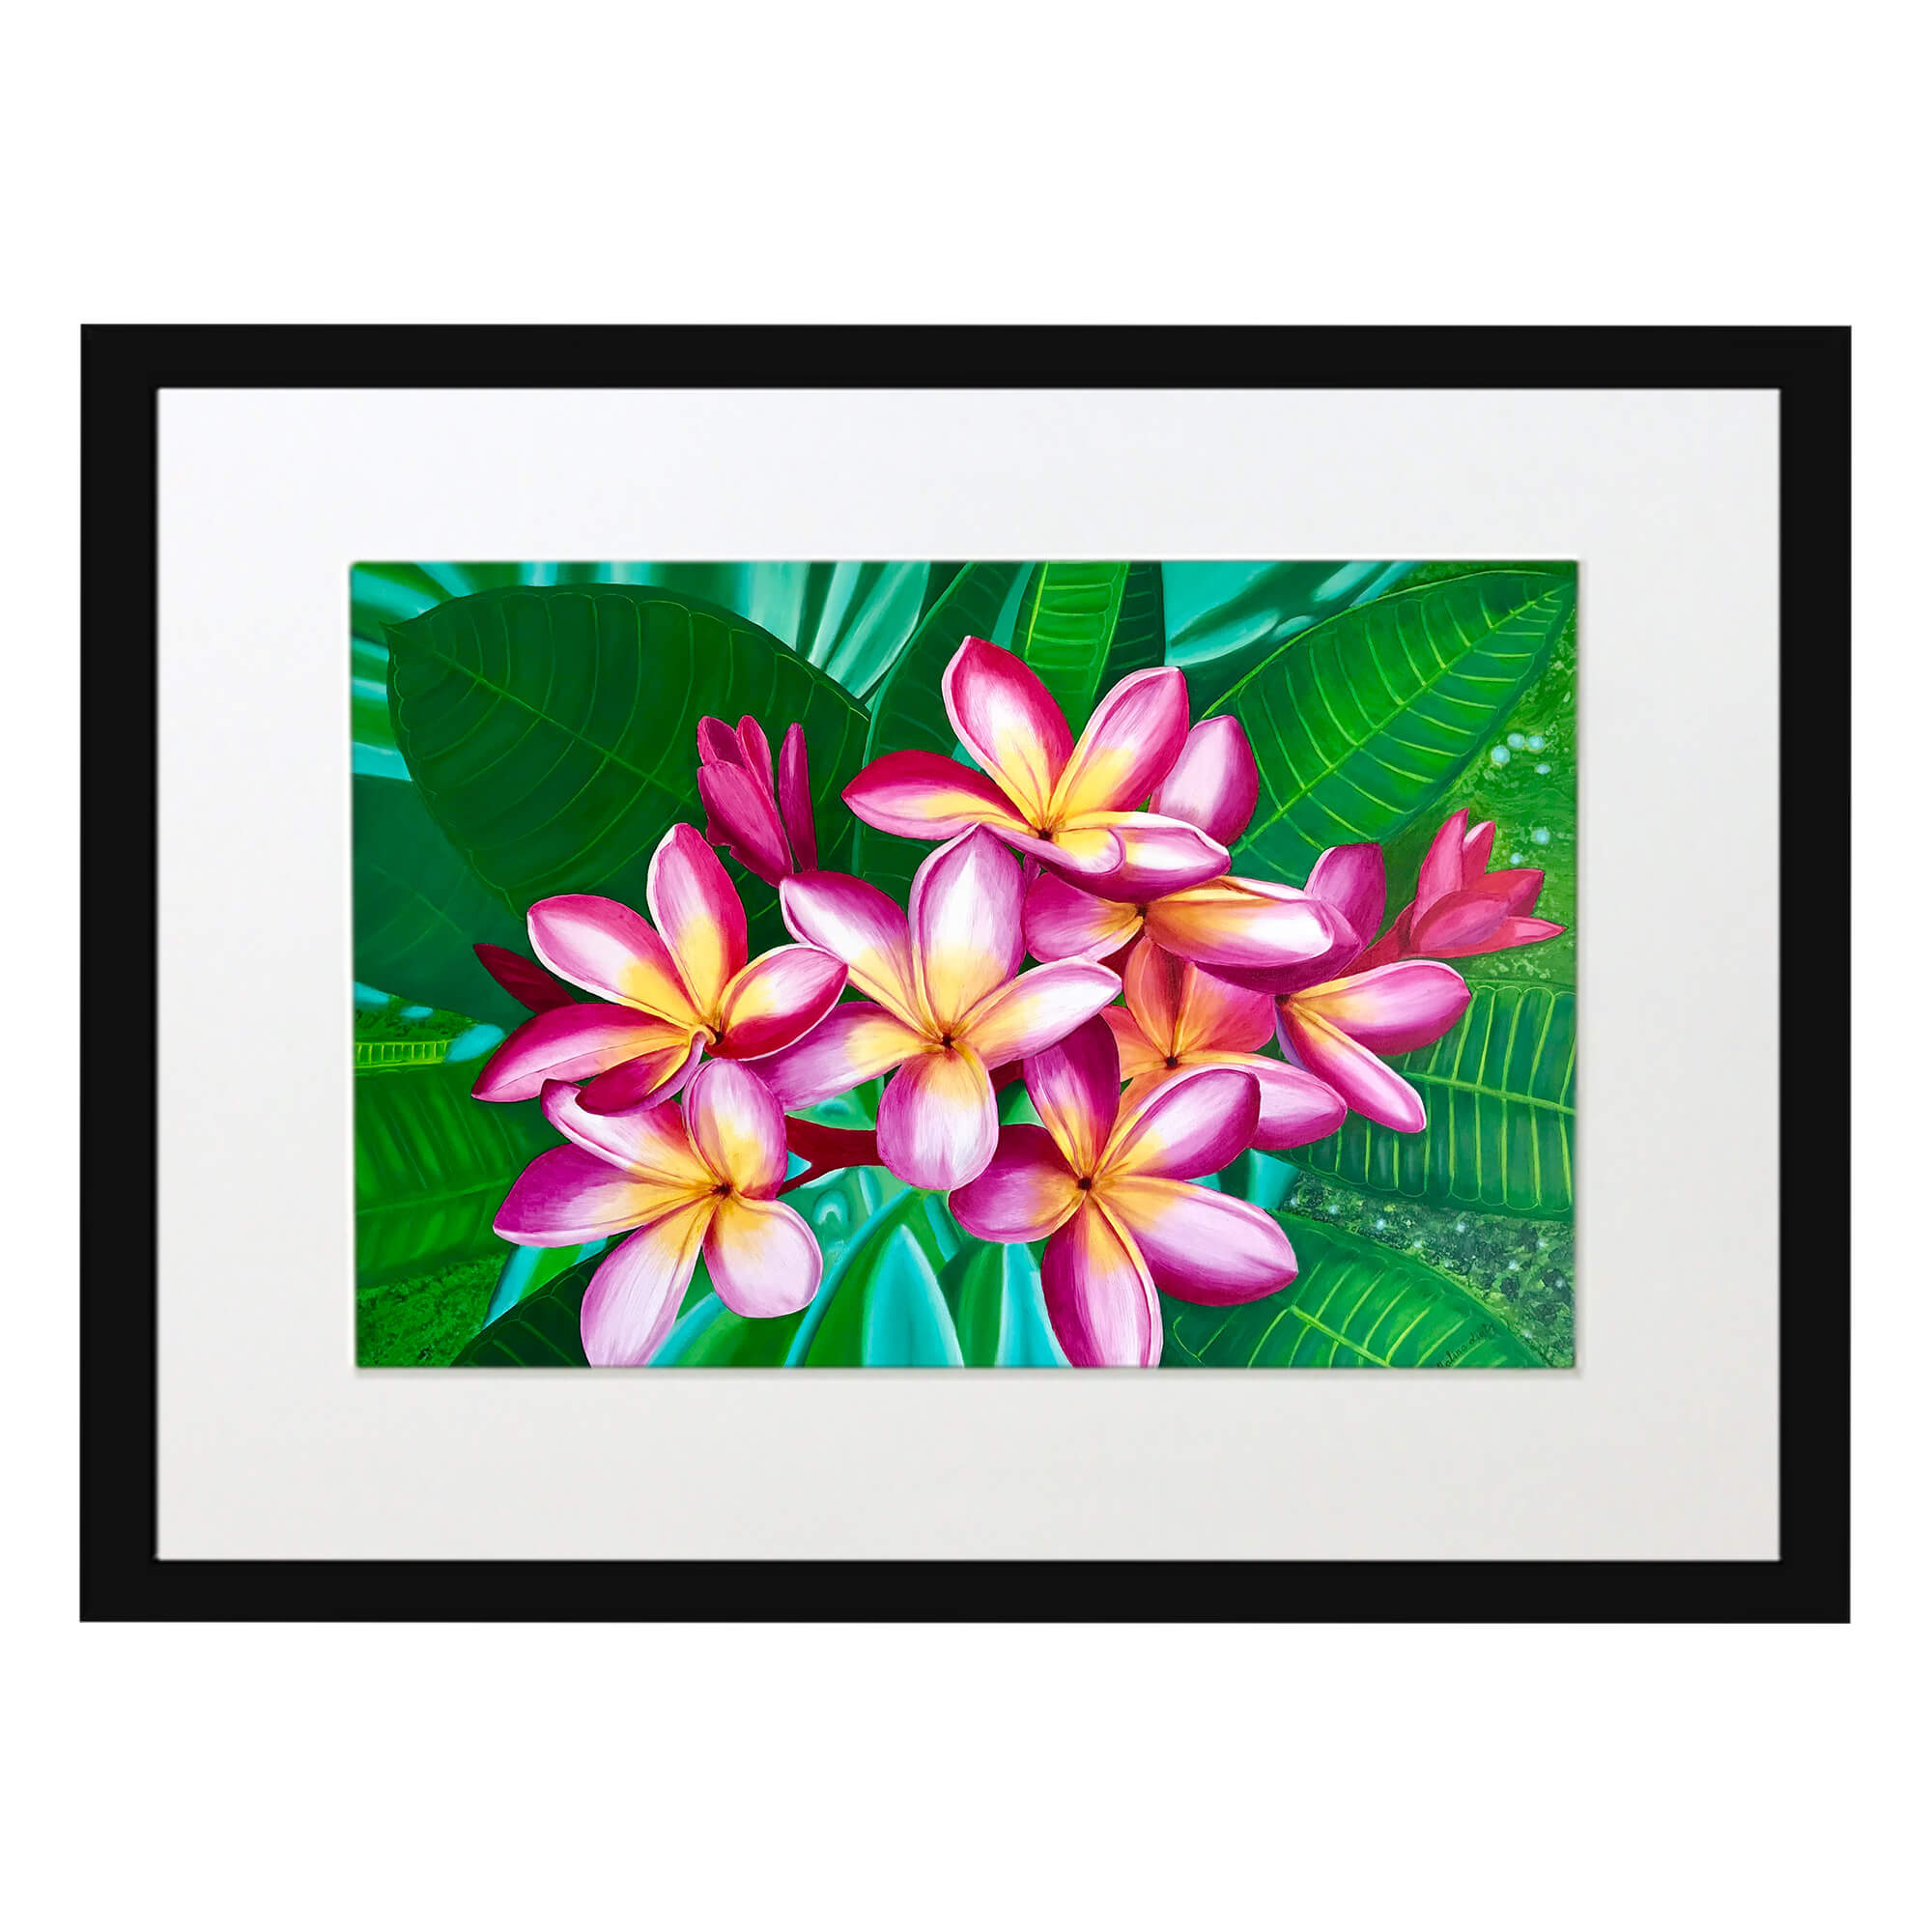 Matted art print with black frame showcasing pink flowers blooming by hawaii artist Galina Lintz 